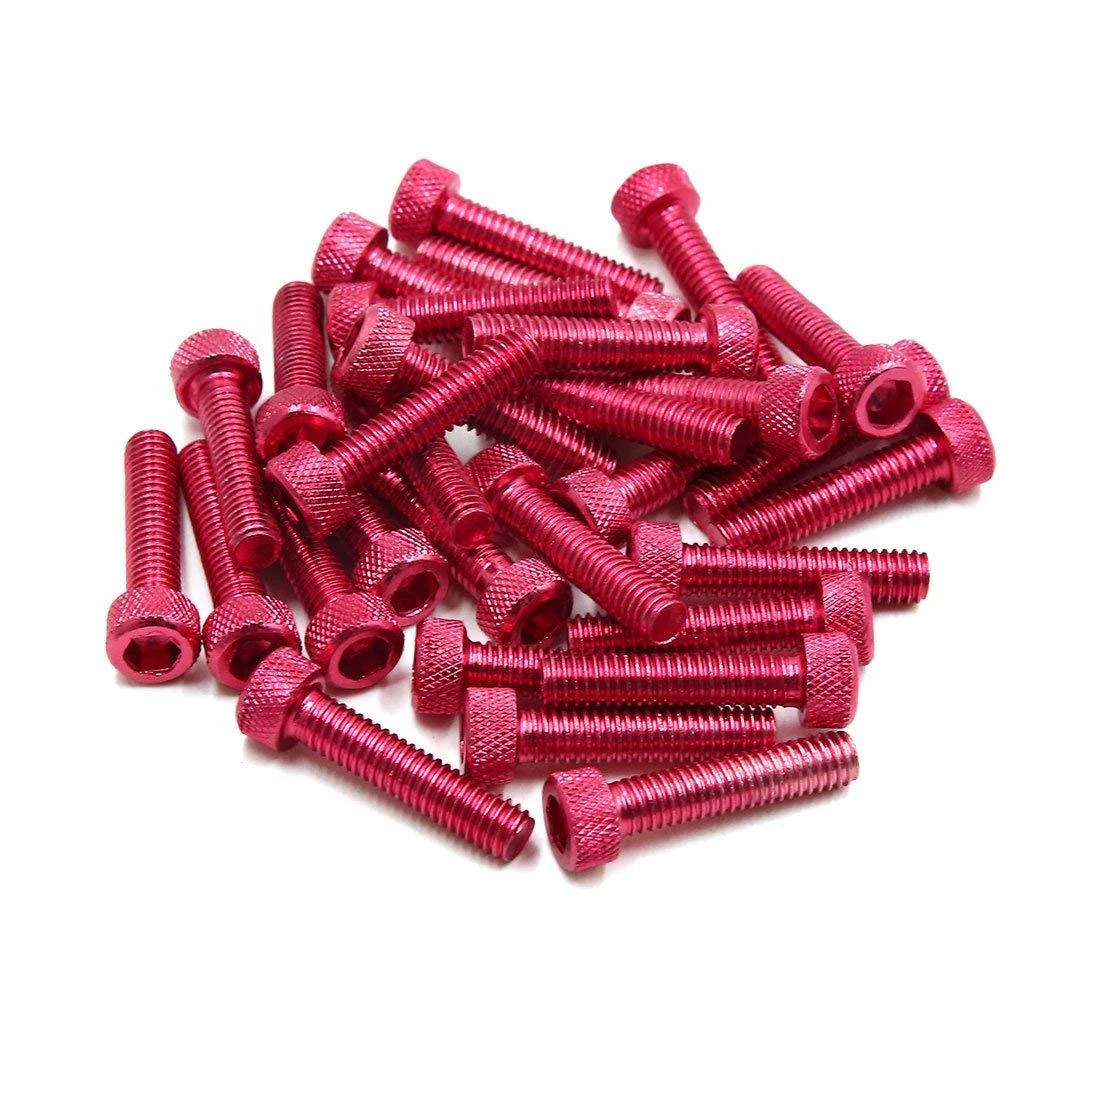 uxcell 8Pcs Colorful Titanium Alloy Motorcycle Hexagon Bolts Screws Fastener M6 x 30mm 